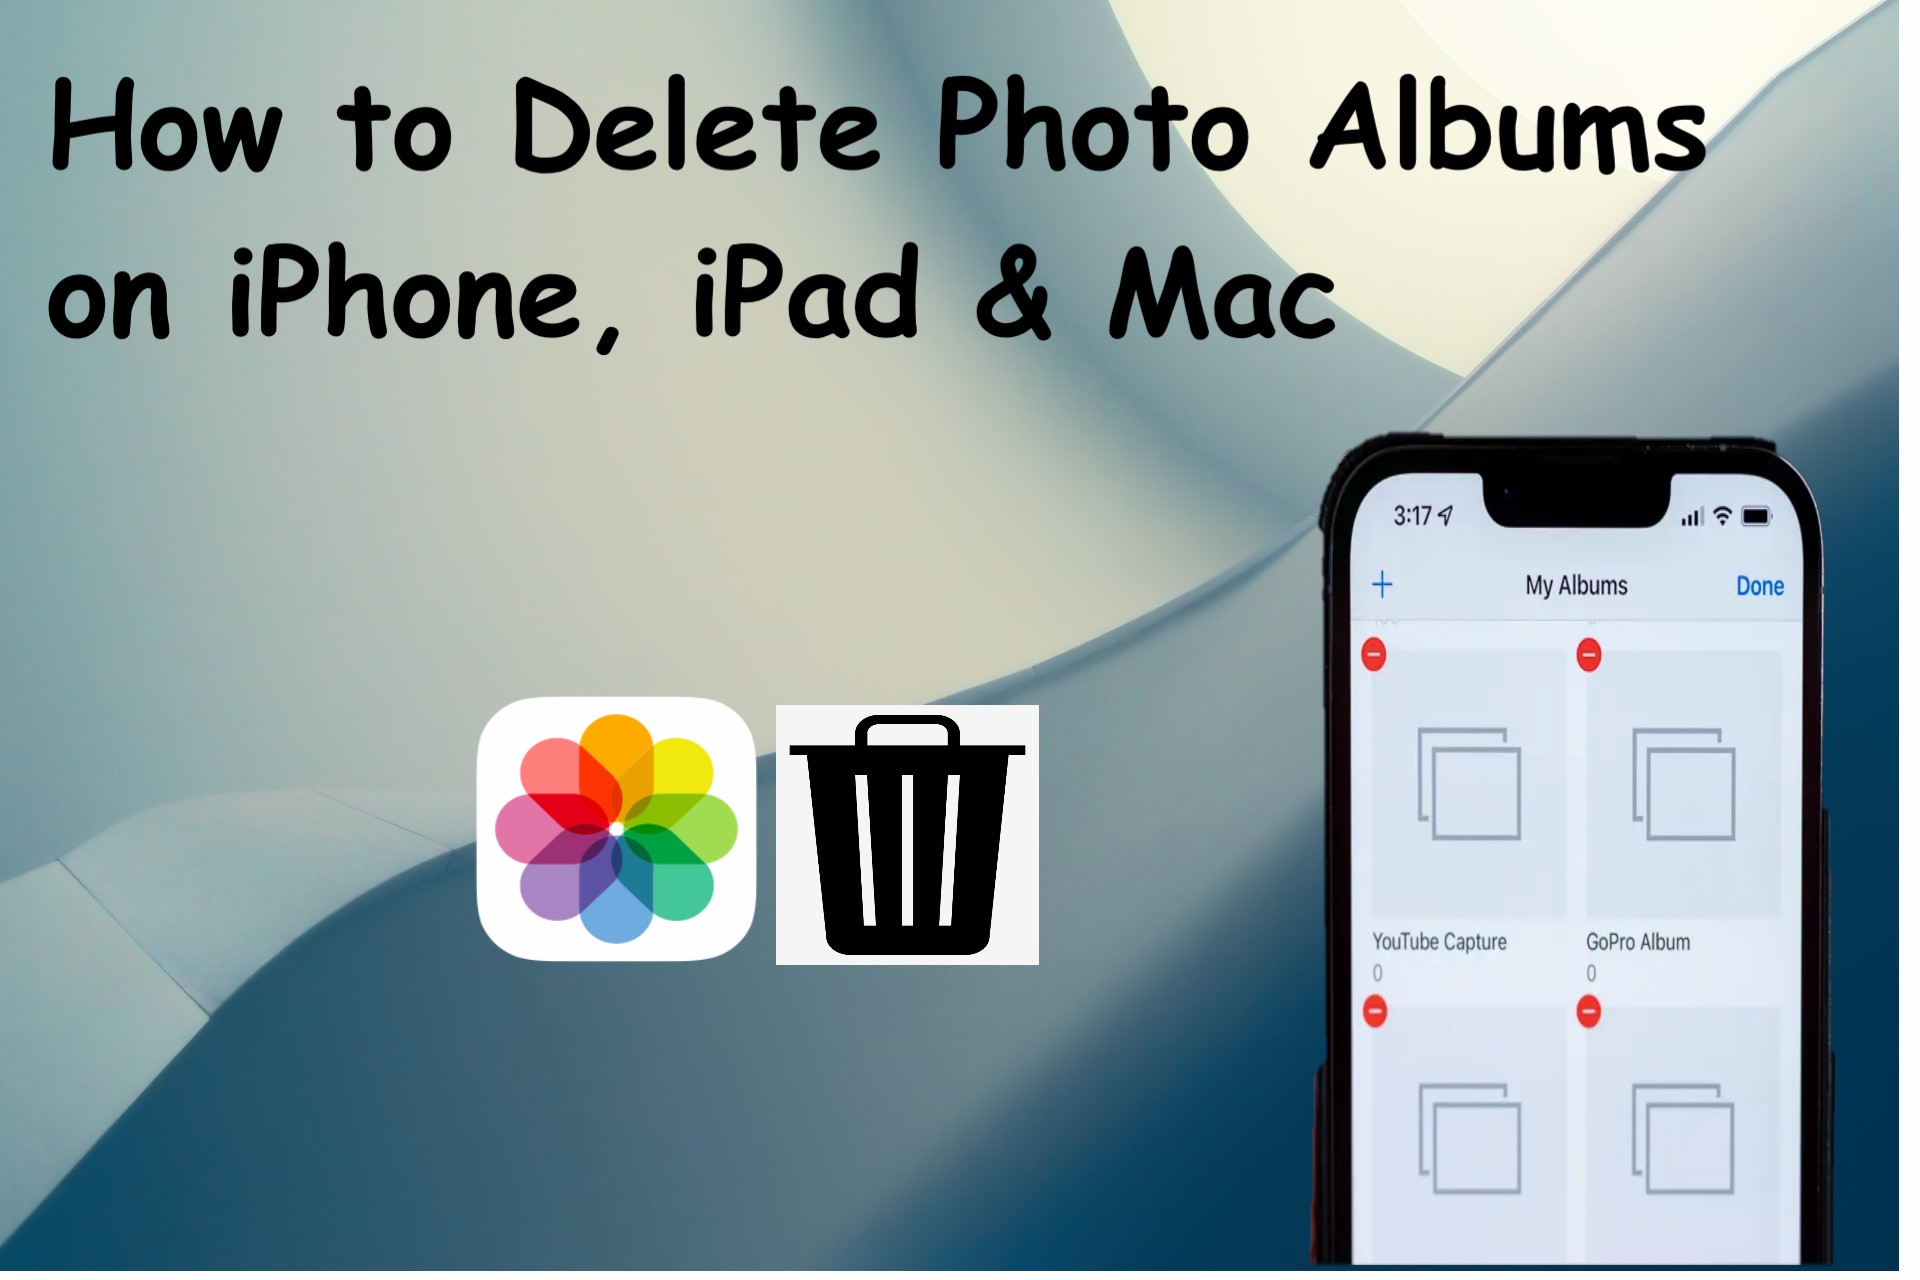 How to delete photo albums on iPhone